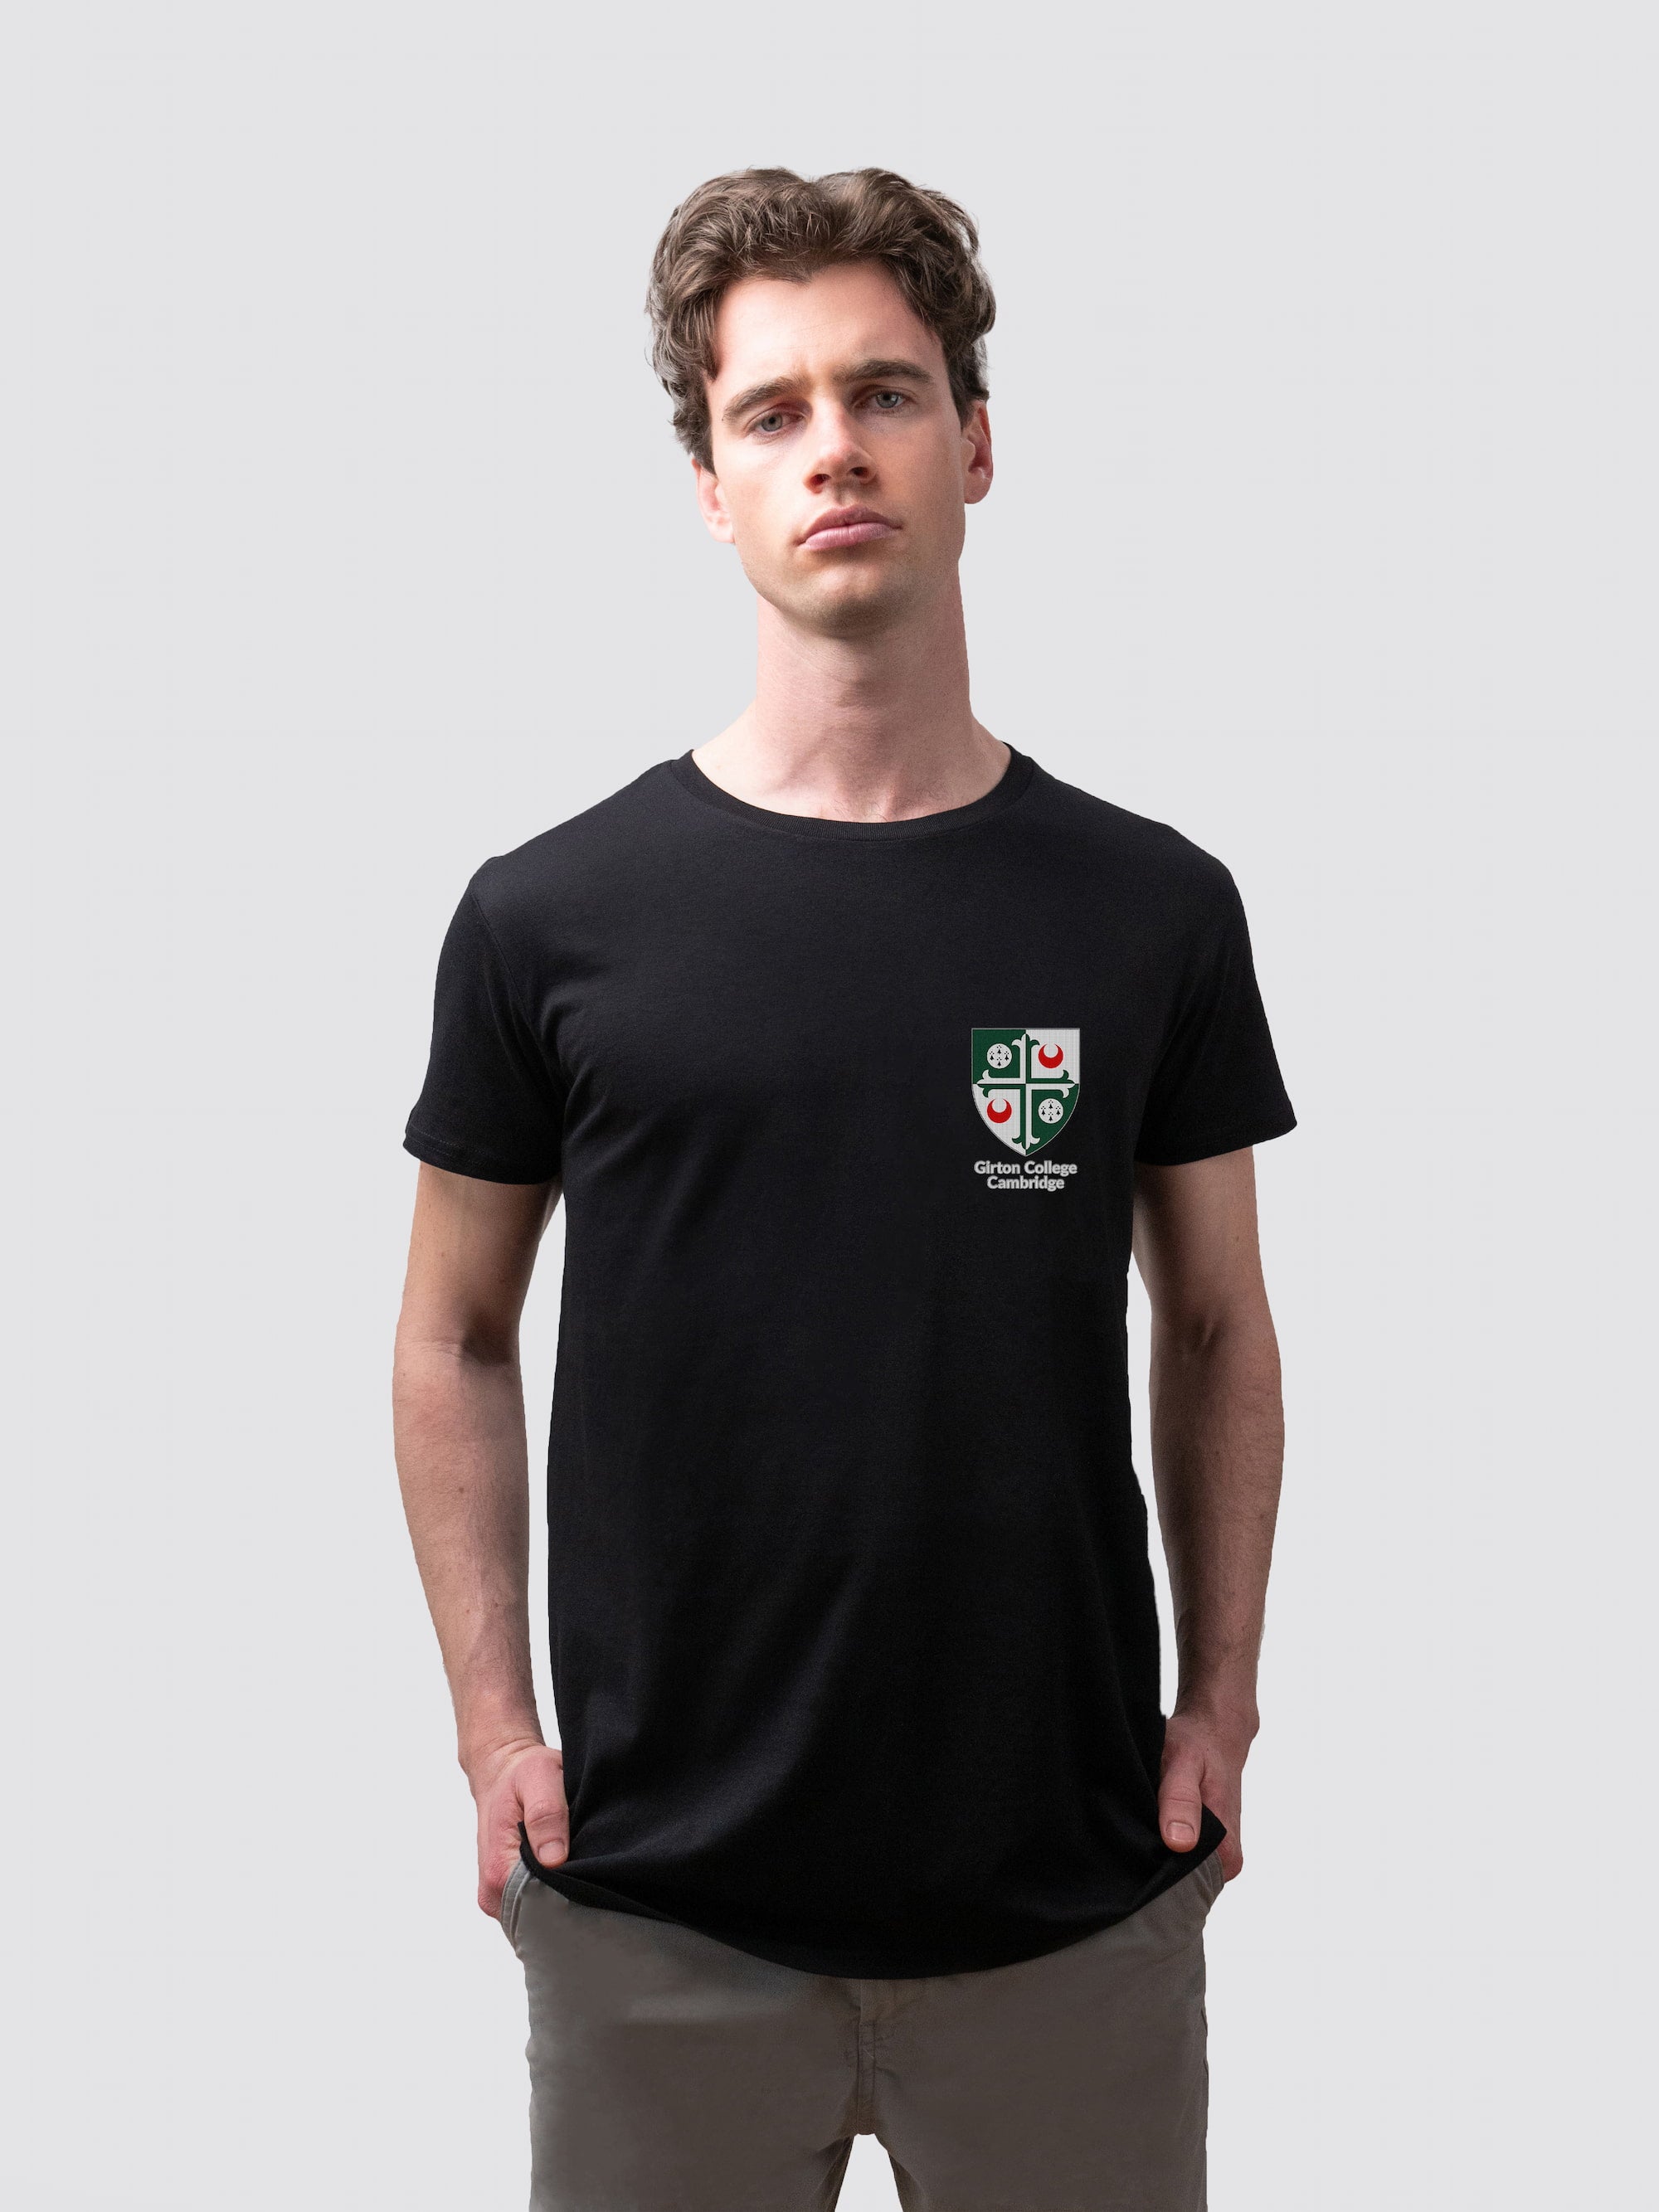 Sustainable Girton t-shirt, made from organic cotton